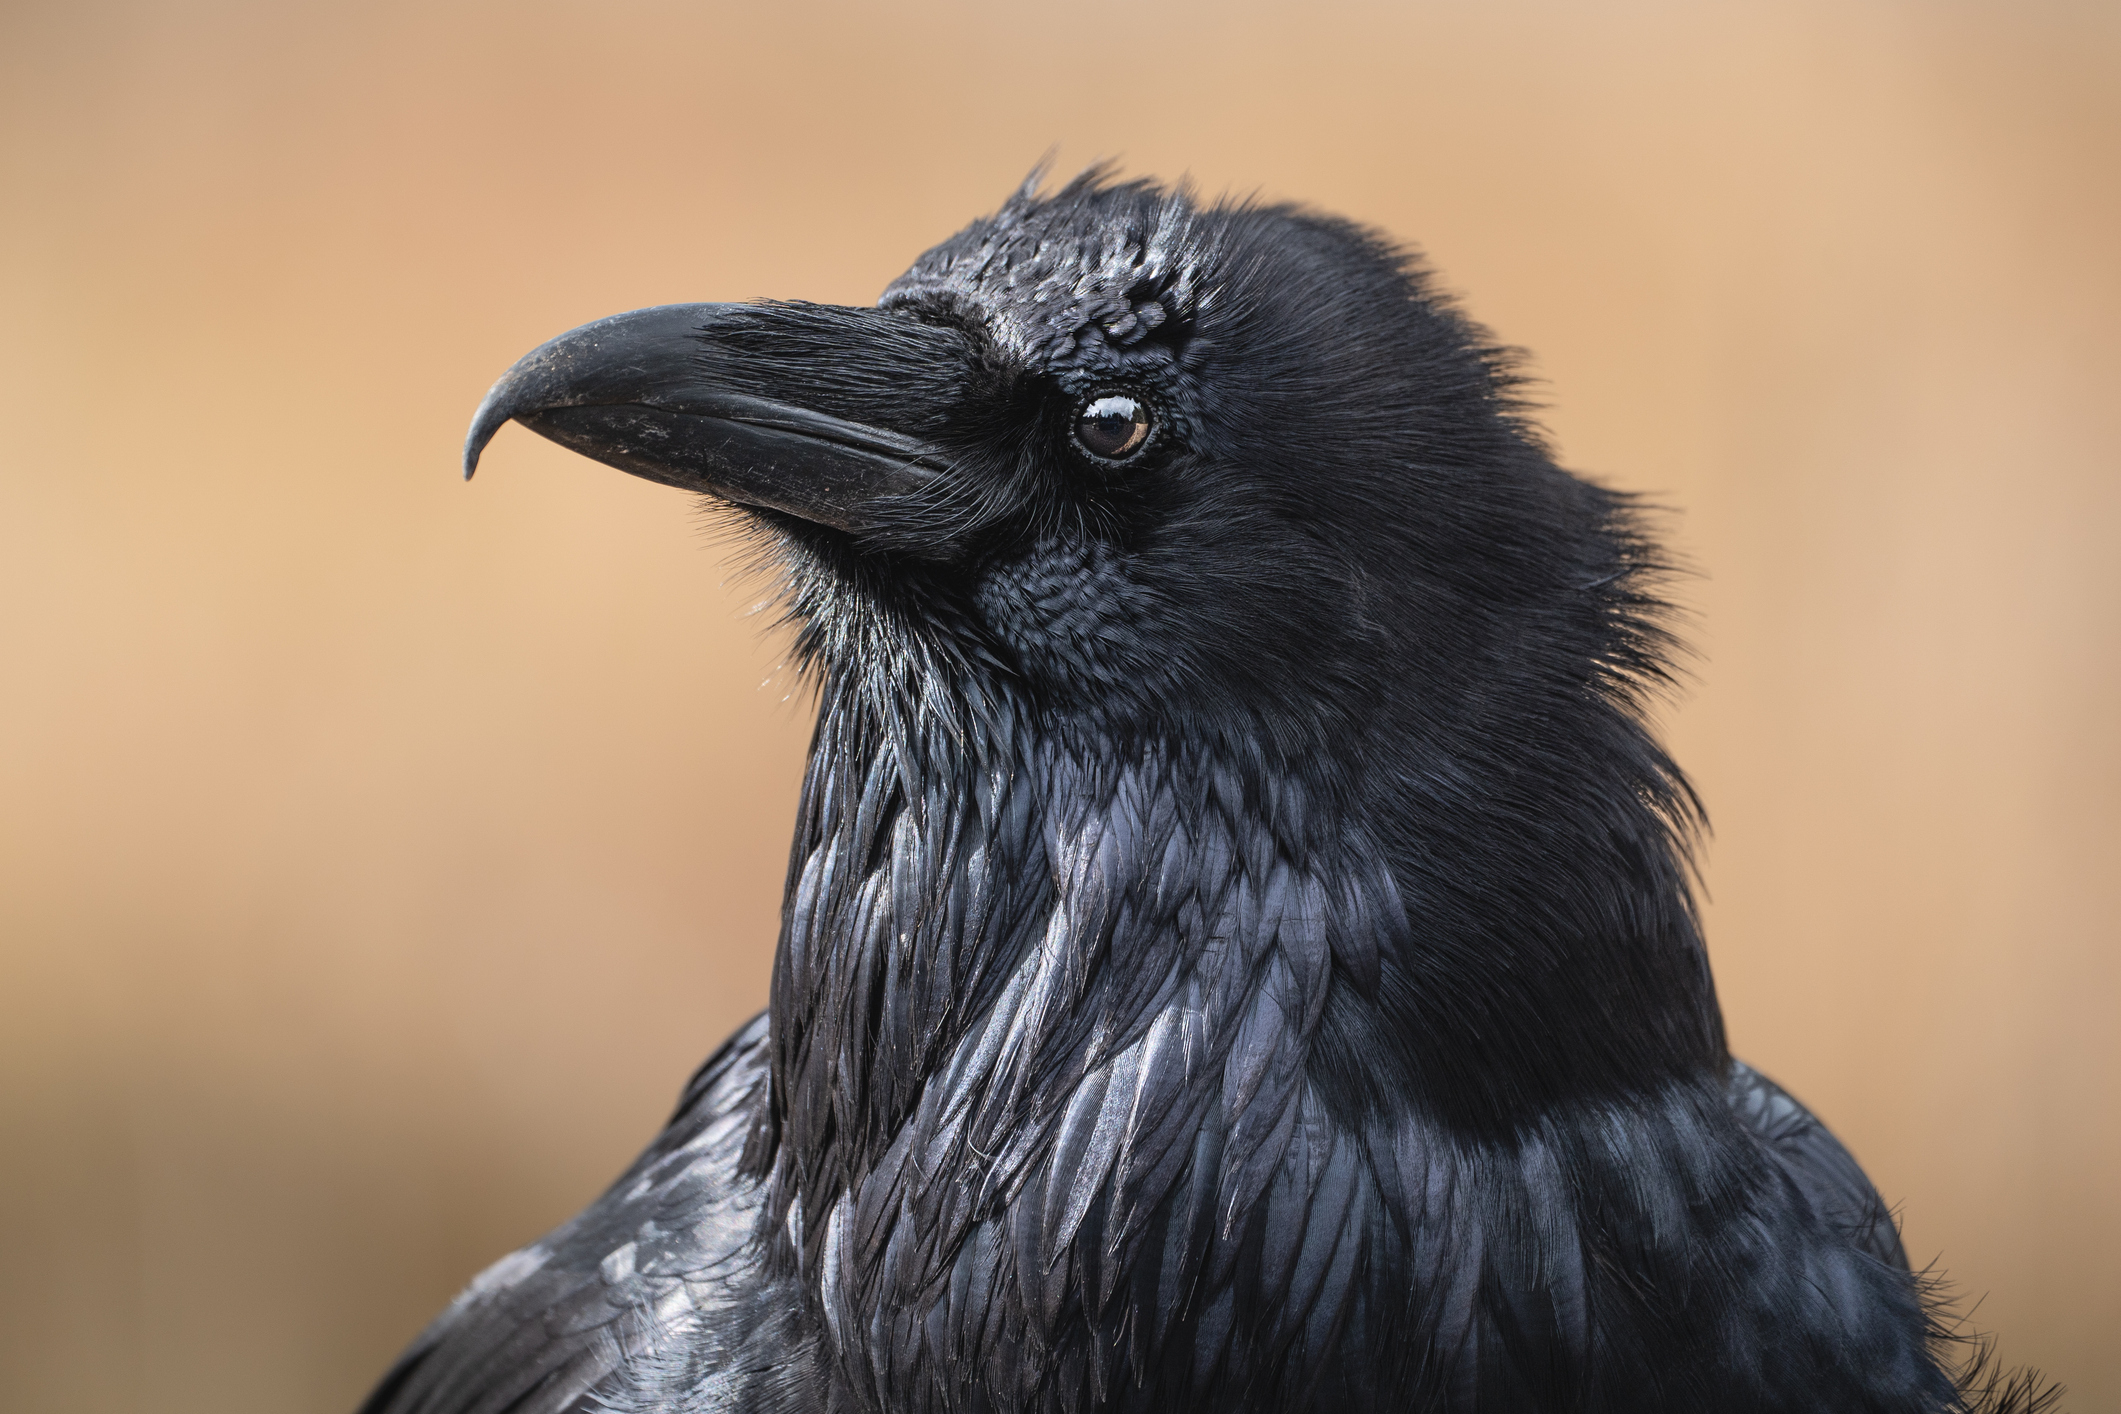 Close-up of a raven with detailed feathers and a sharp beak, set against a blurred background